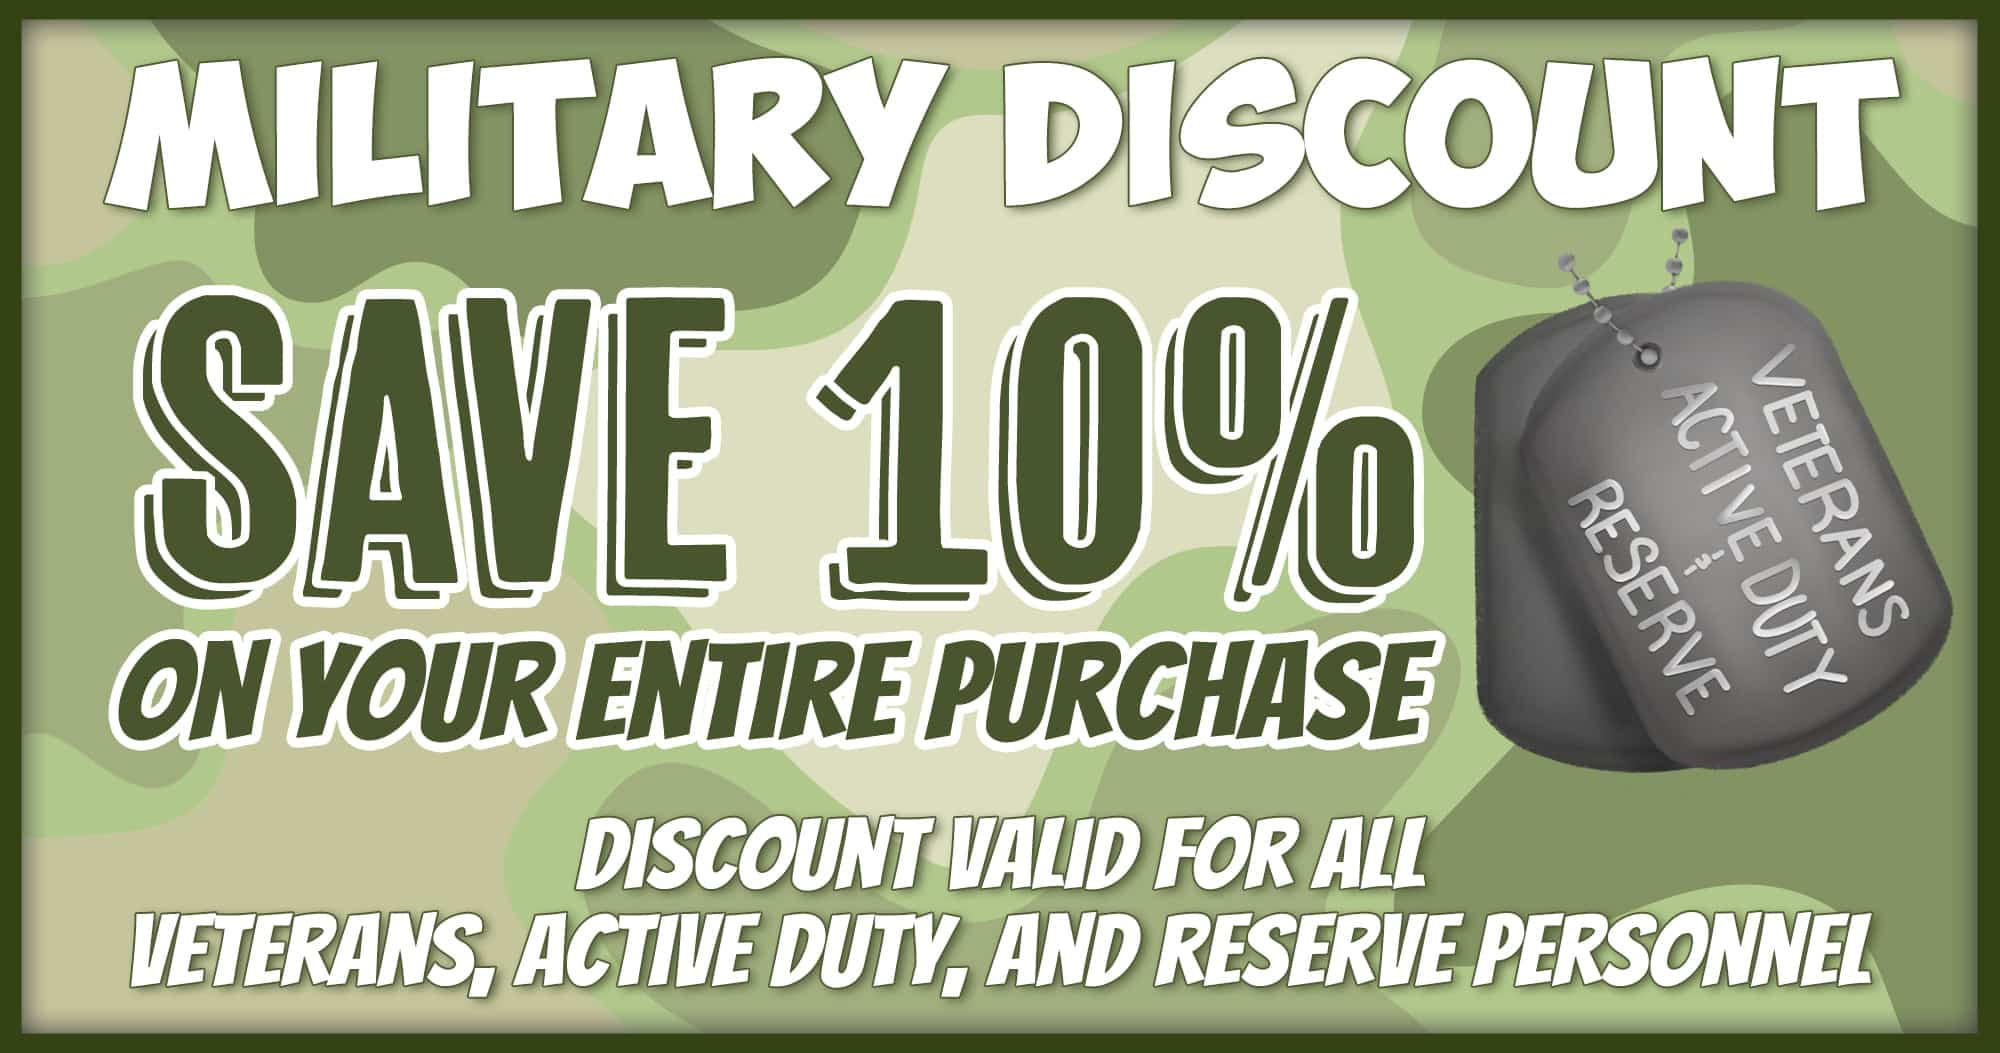 Incredible Pizza Memorial Day Military and Law Enforcement Discount 10% Off with Badge